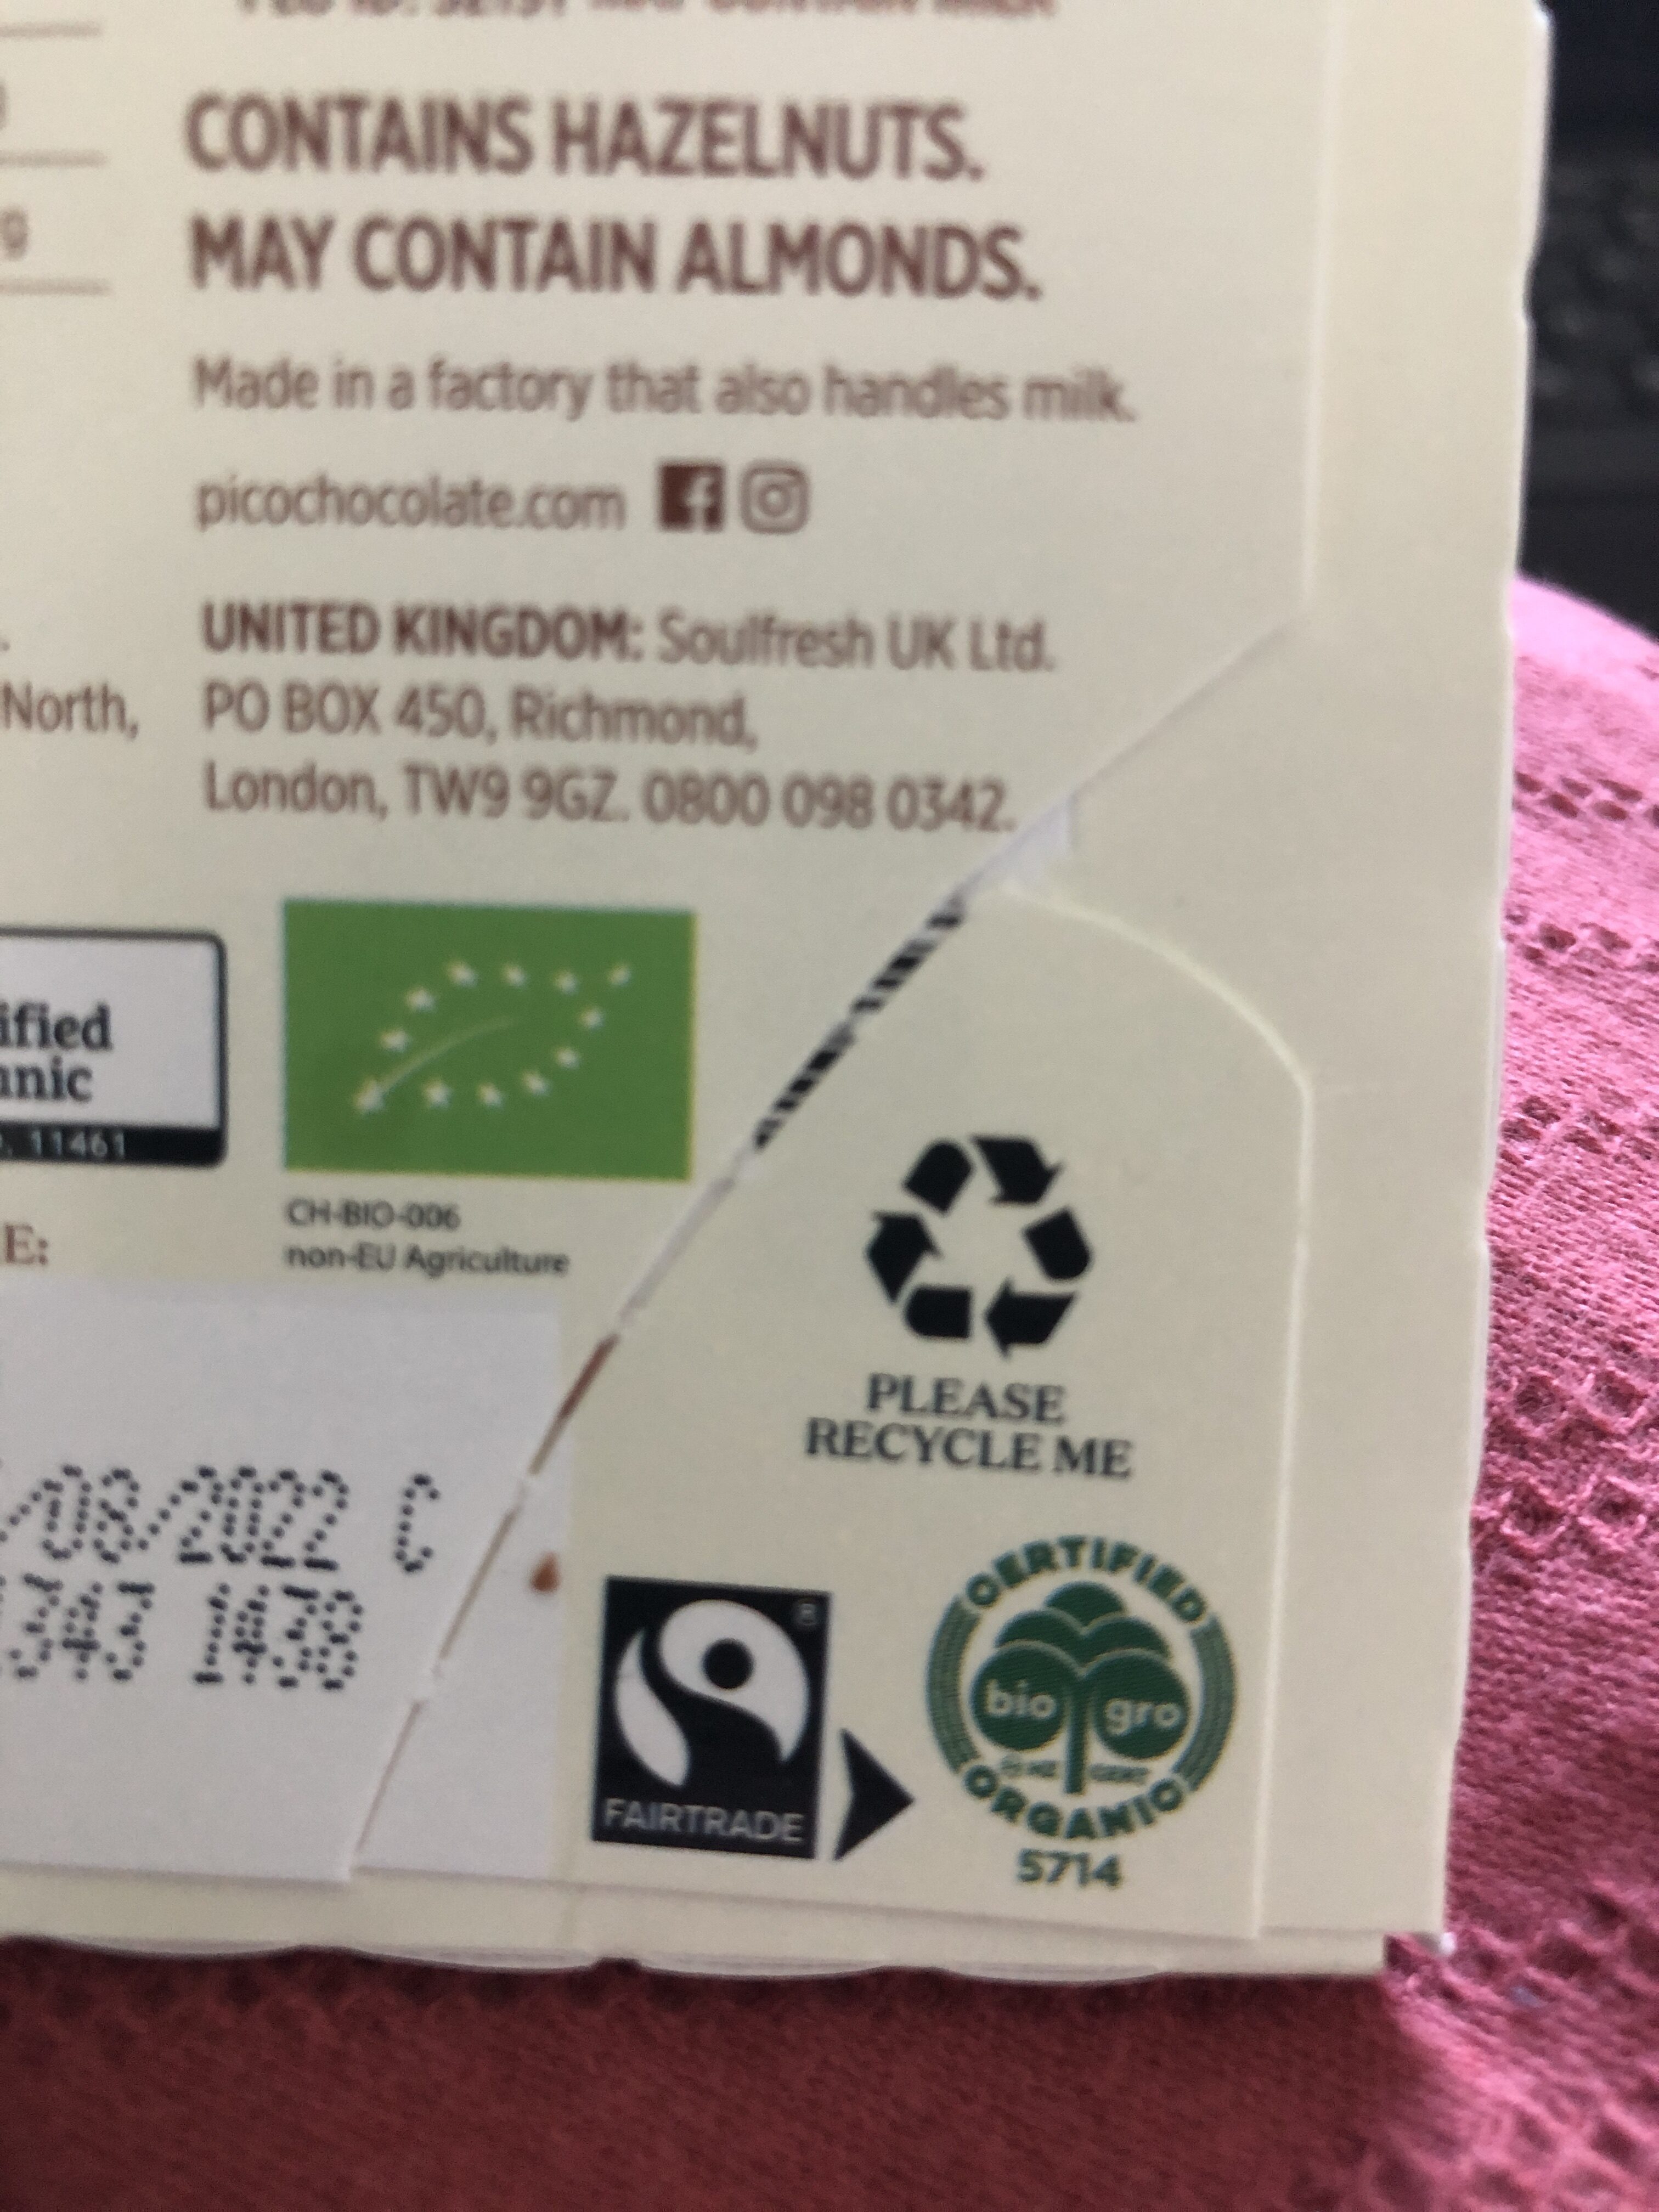 Pico Vegan Organic Hazelnut Milk - Recycling instructions and/or packaging information